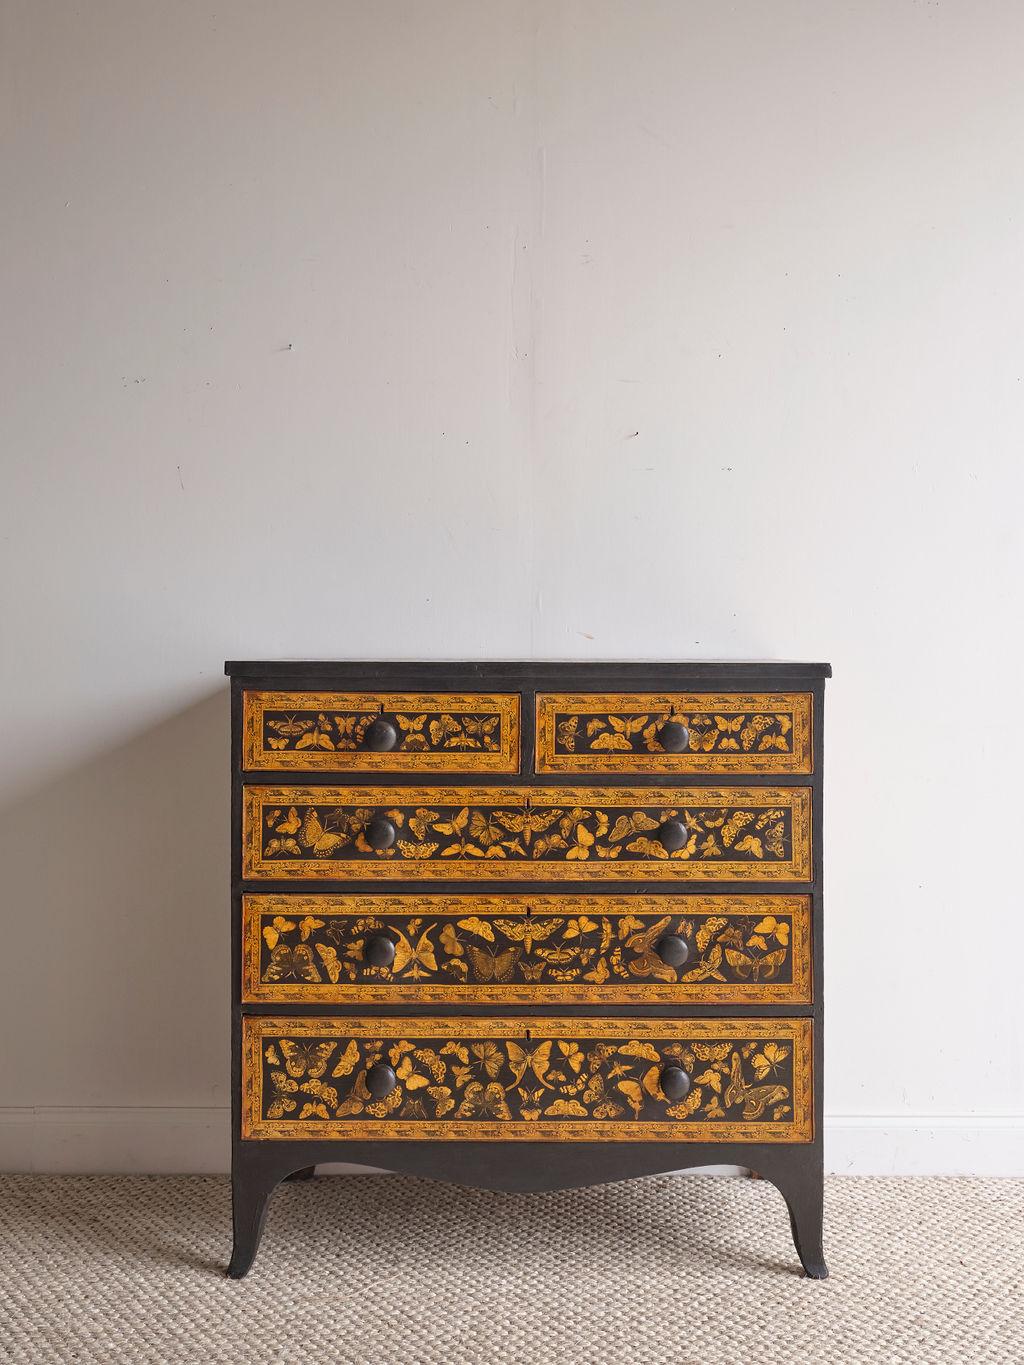 This chest of drawers was built in the Victorian era and displays several different species of butterflies. The butterflies are a light caramel color, and the background color is black. There are two top smaller drawers and three larger bottom